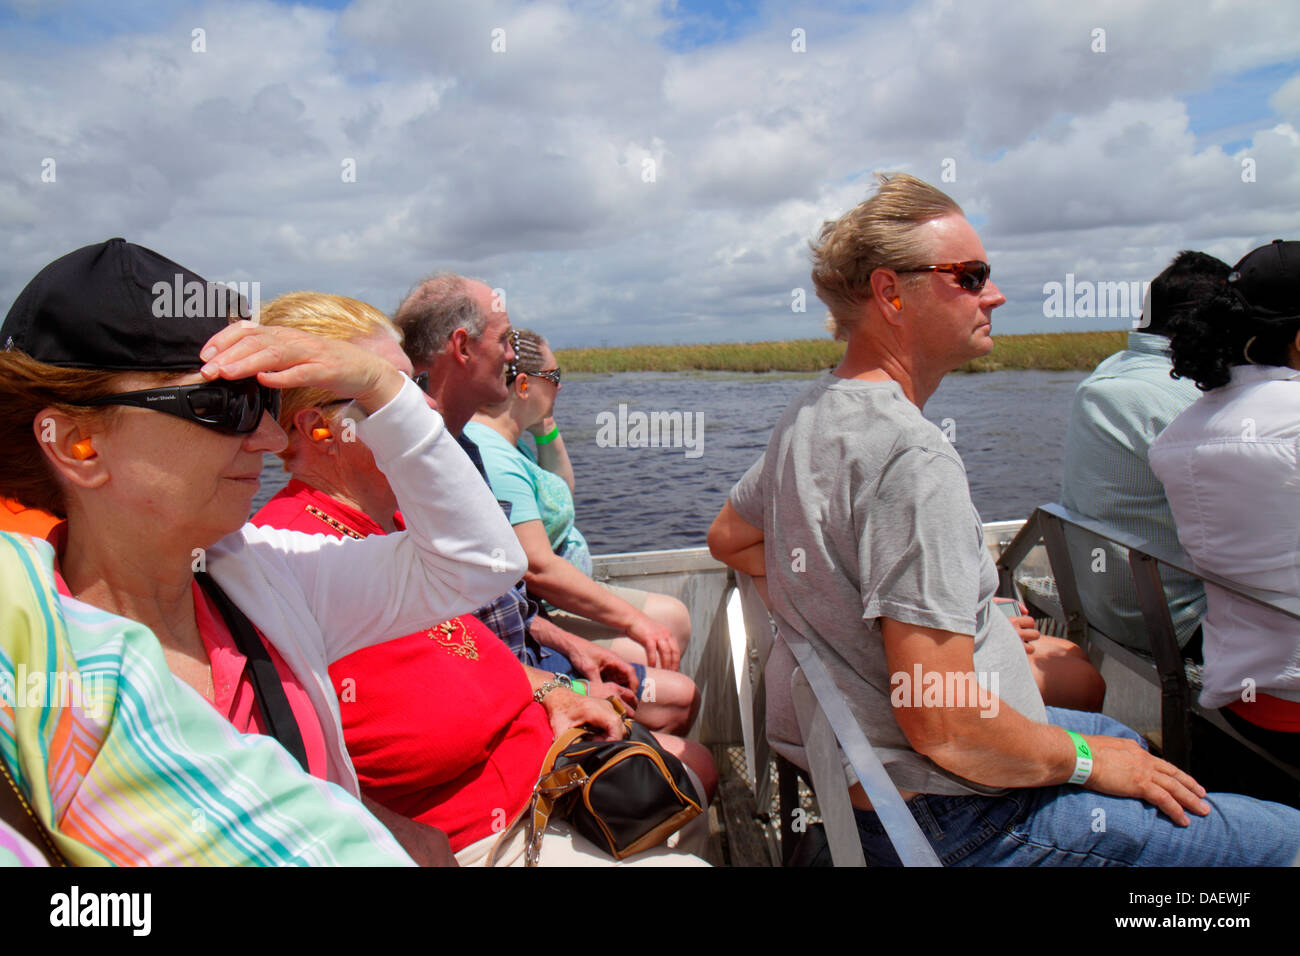 Fort Ft. Lauderdale Weston Florida,Fort Ft. Lauderdale,Sawgrass Recreation Park,Everglades,riders airboat ride,wind,holding onto hat,adult adults woma Stock Photo